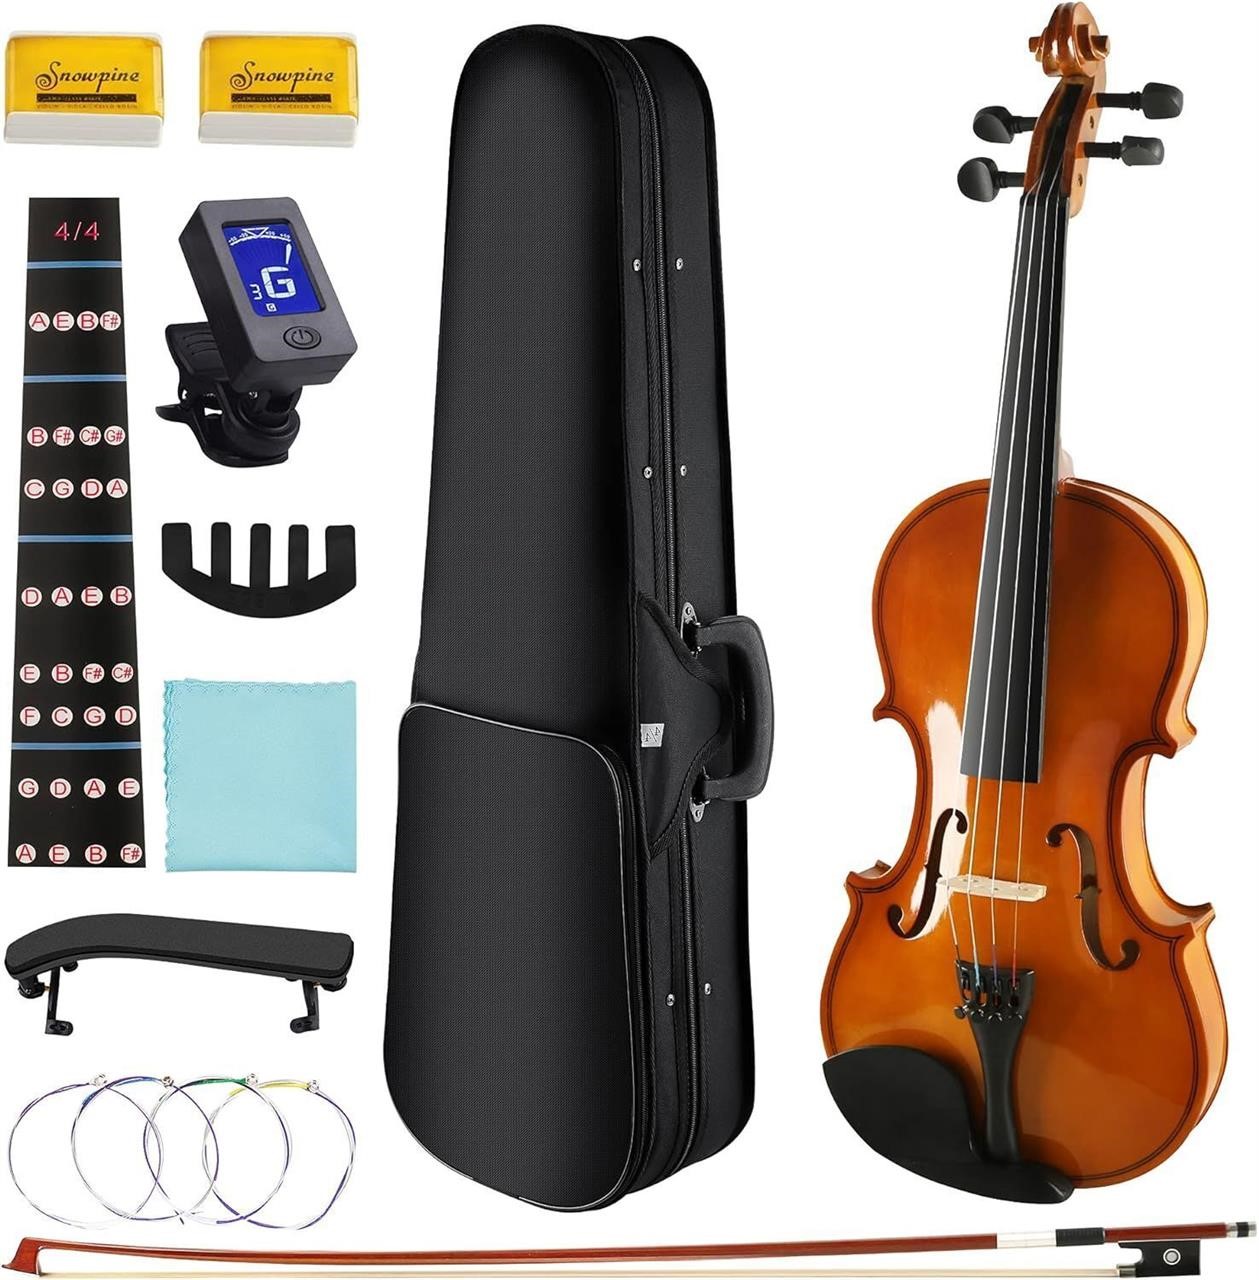 DEBEIJIN 4/4 Violin - For Adults and Kids